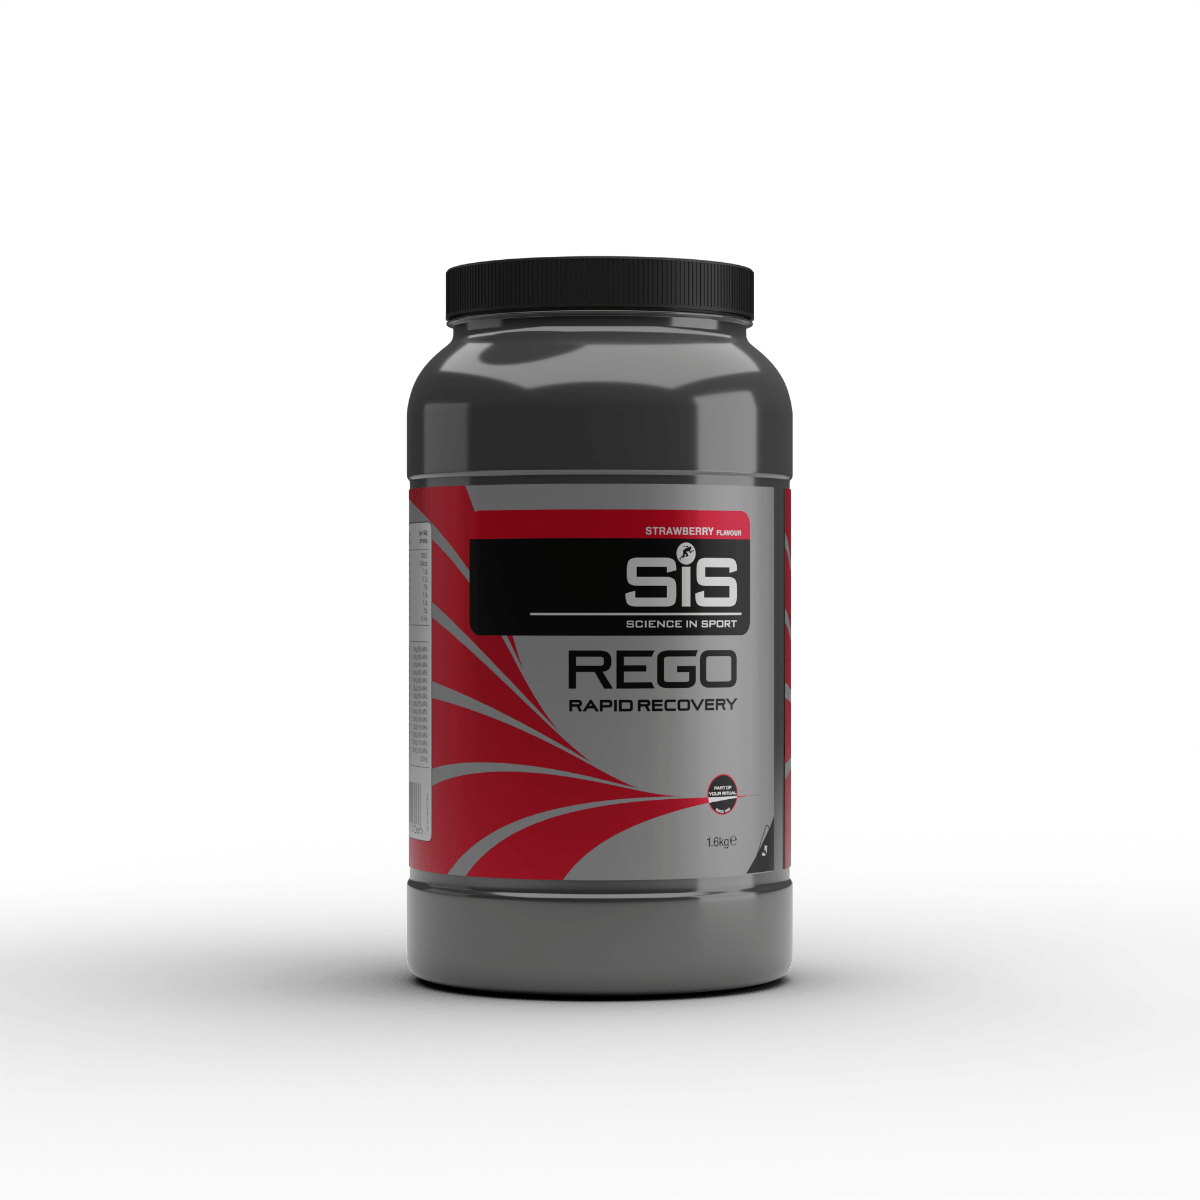 SiS Protein Drink 32 Serving Tub (1.6kg) / Strawberry REGO Rapid Recovery XMiles